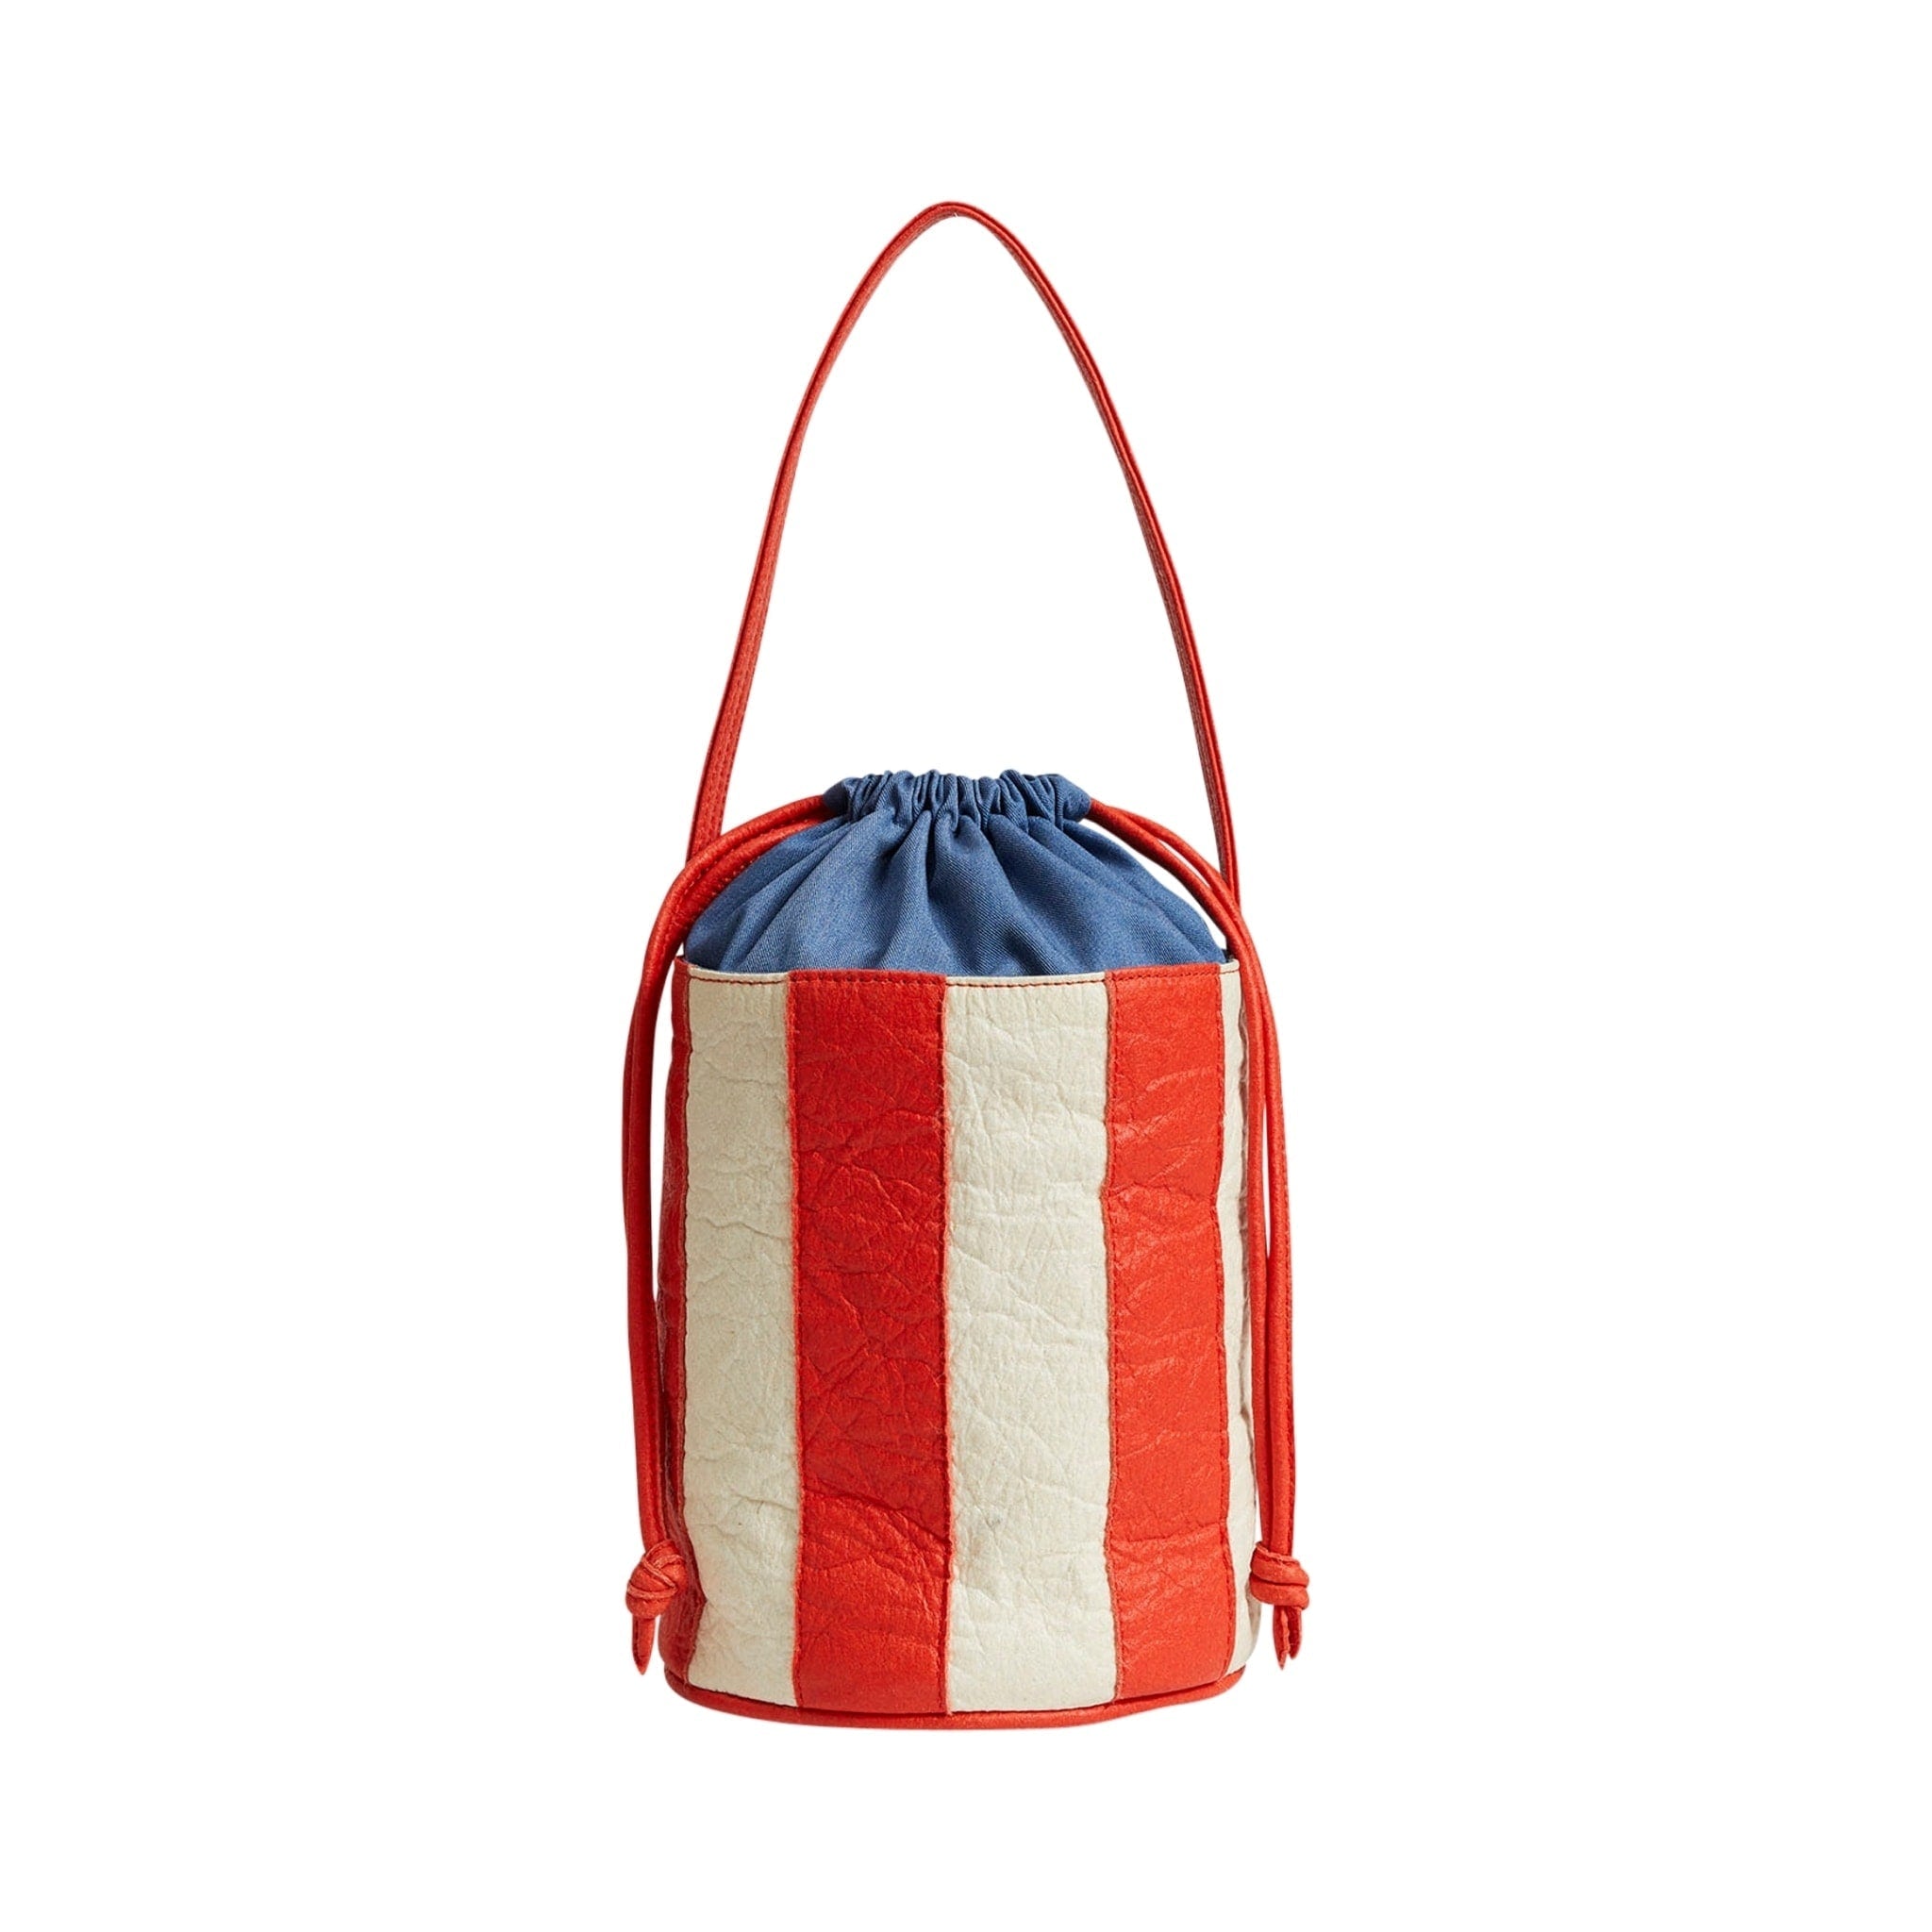 Pineapple leather bucket bag in red and white stripe.